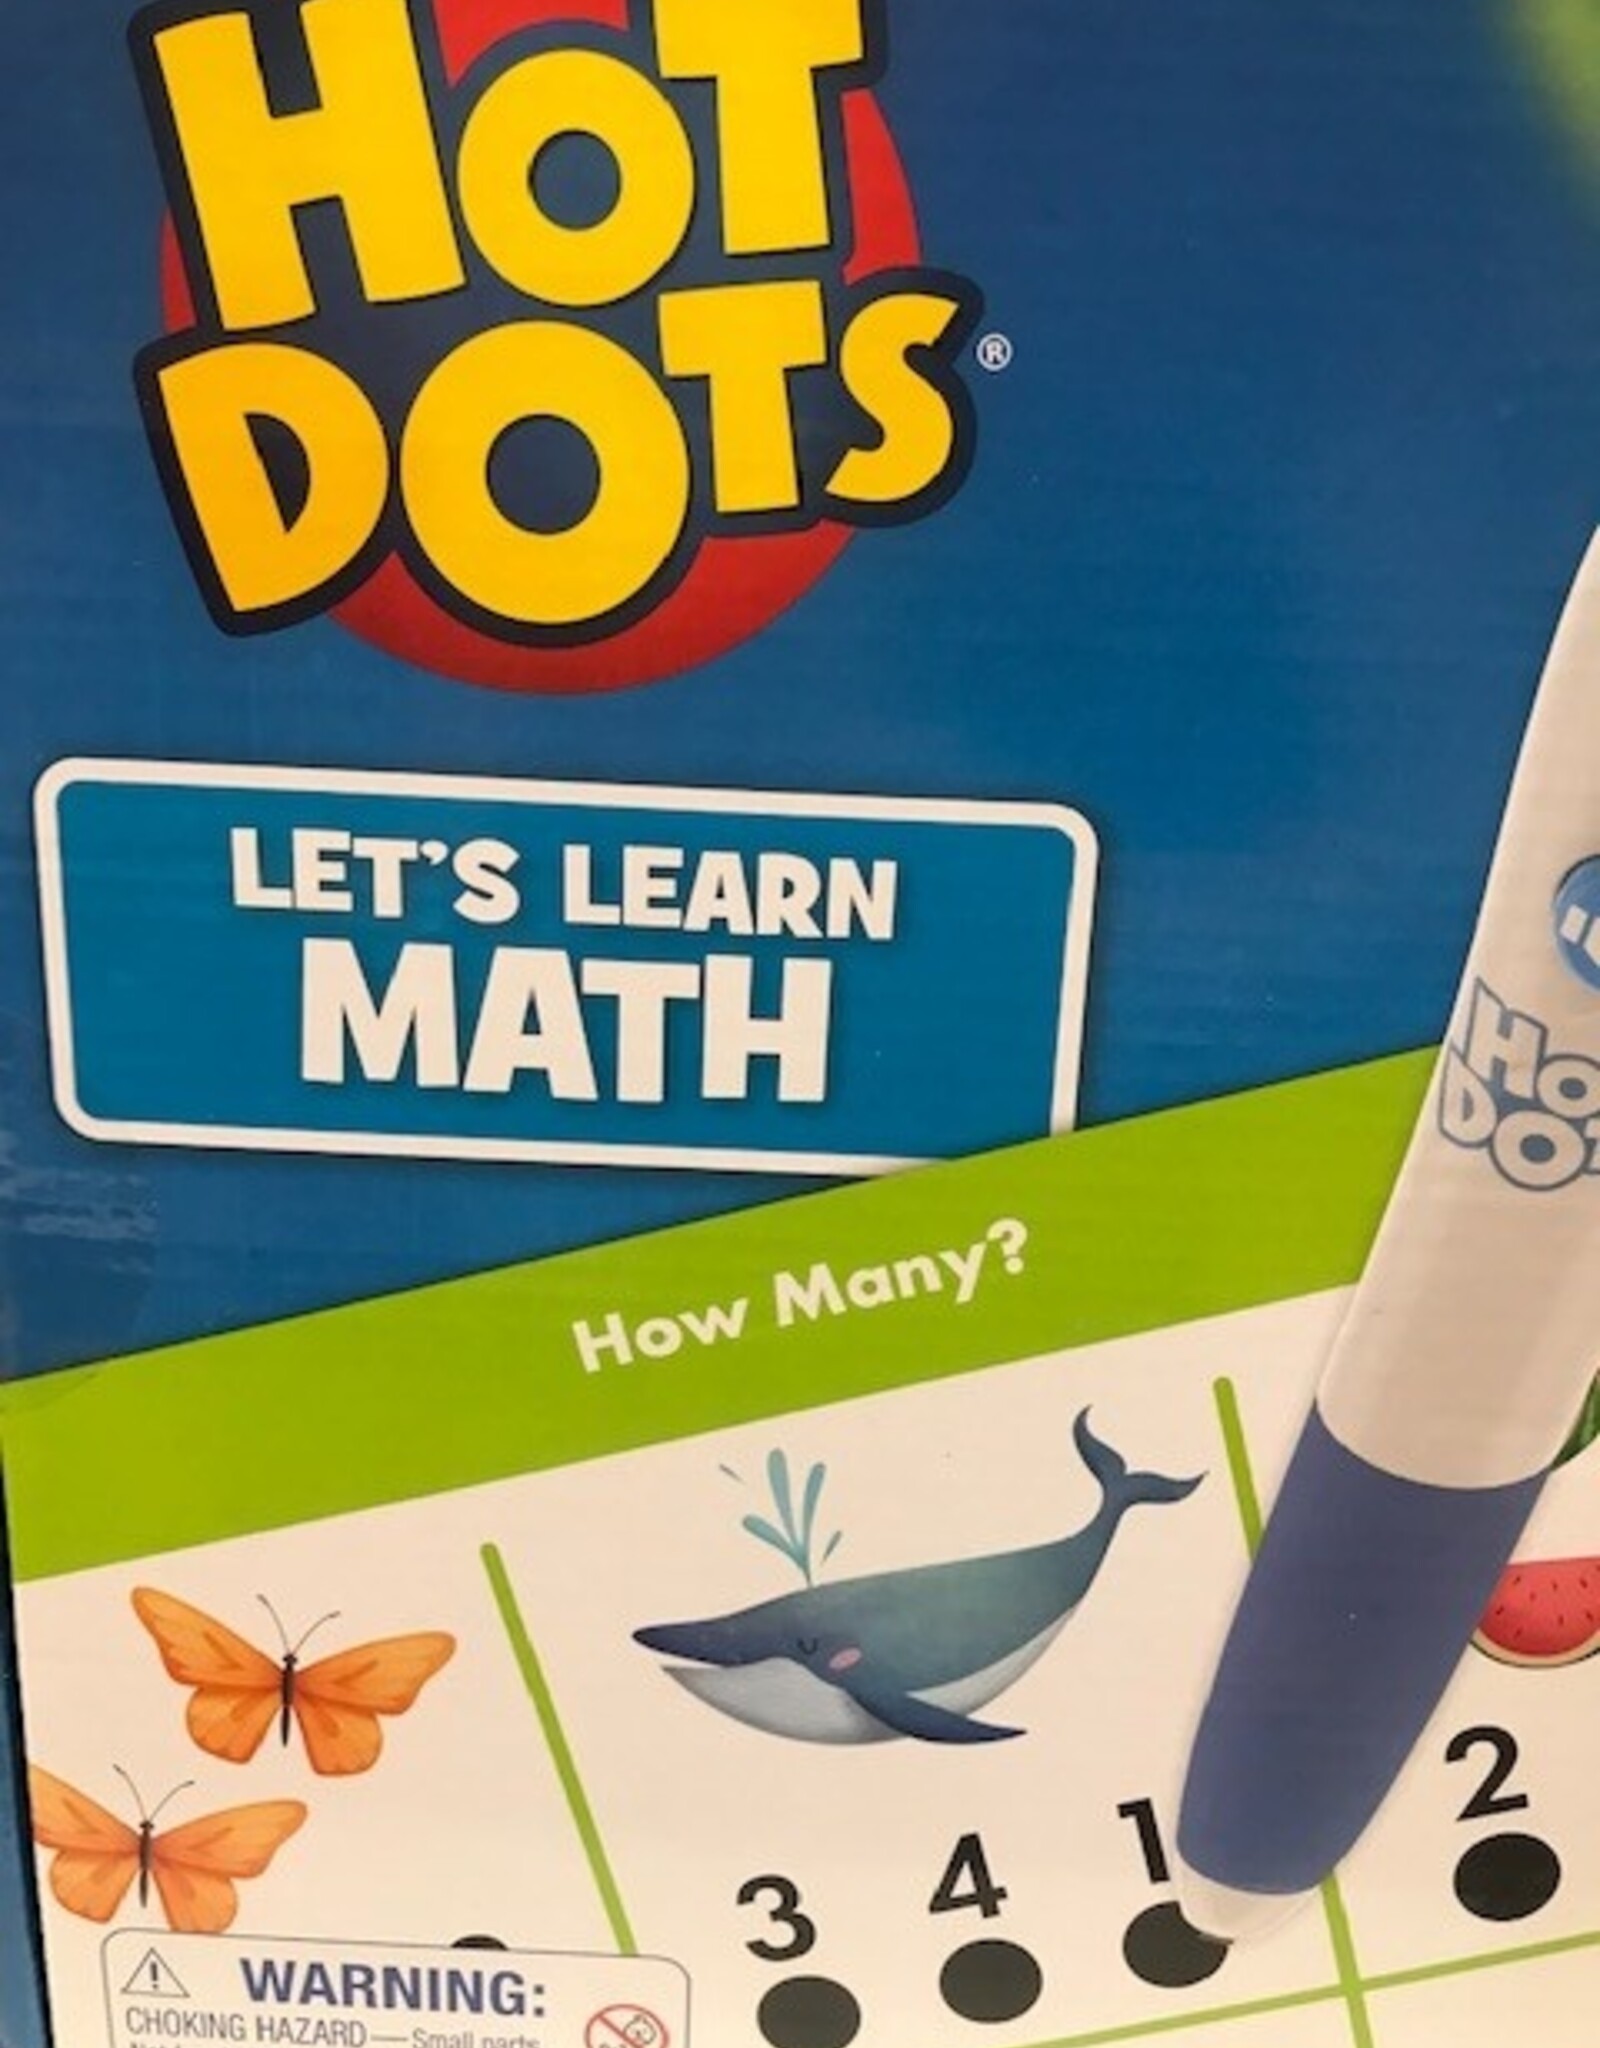 LEARNING EDUCATIONAL HOT DOTS LET'S LEARN PRE-K MATH